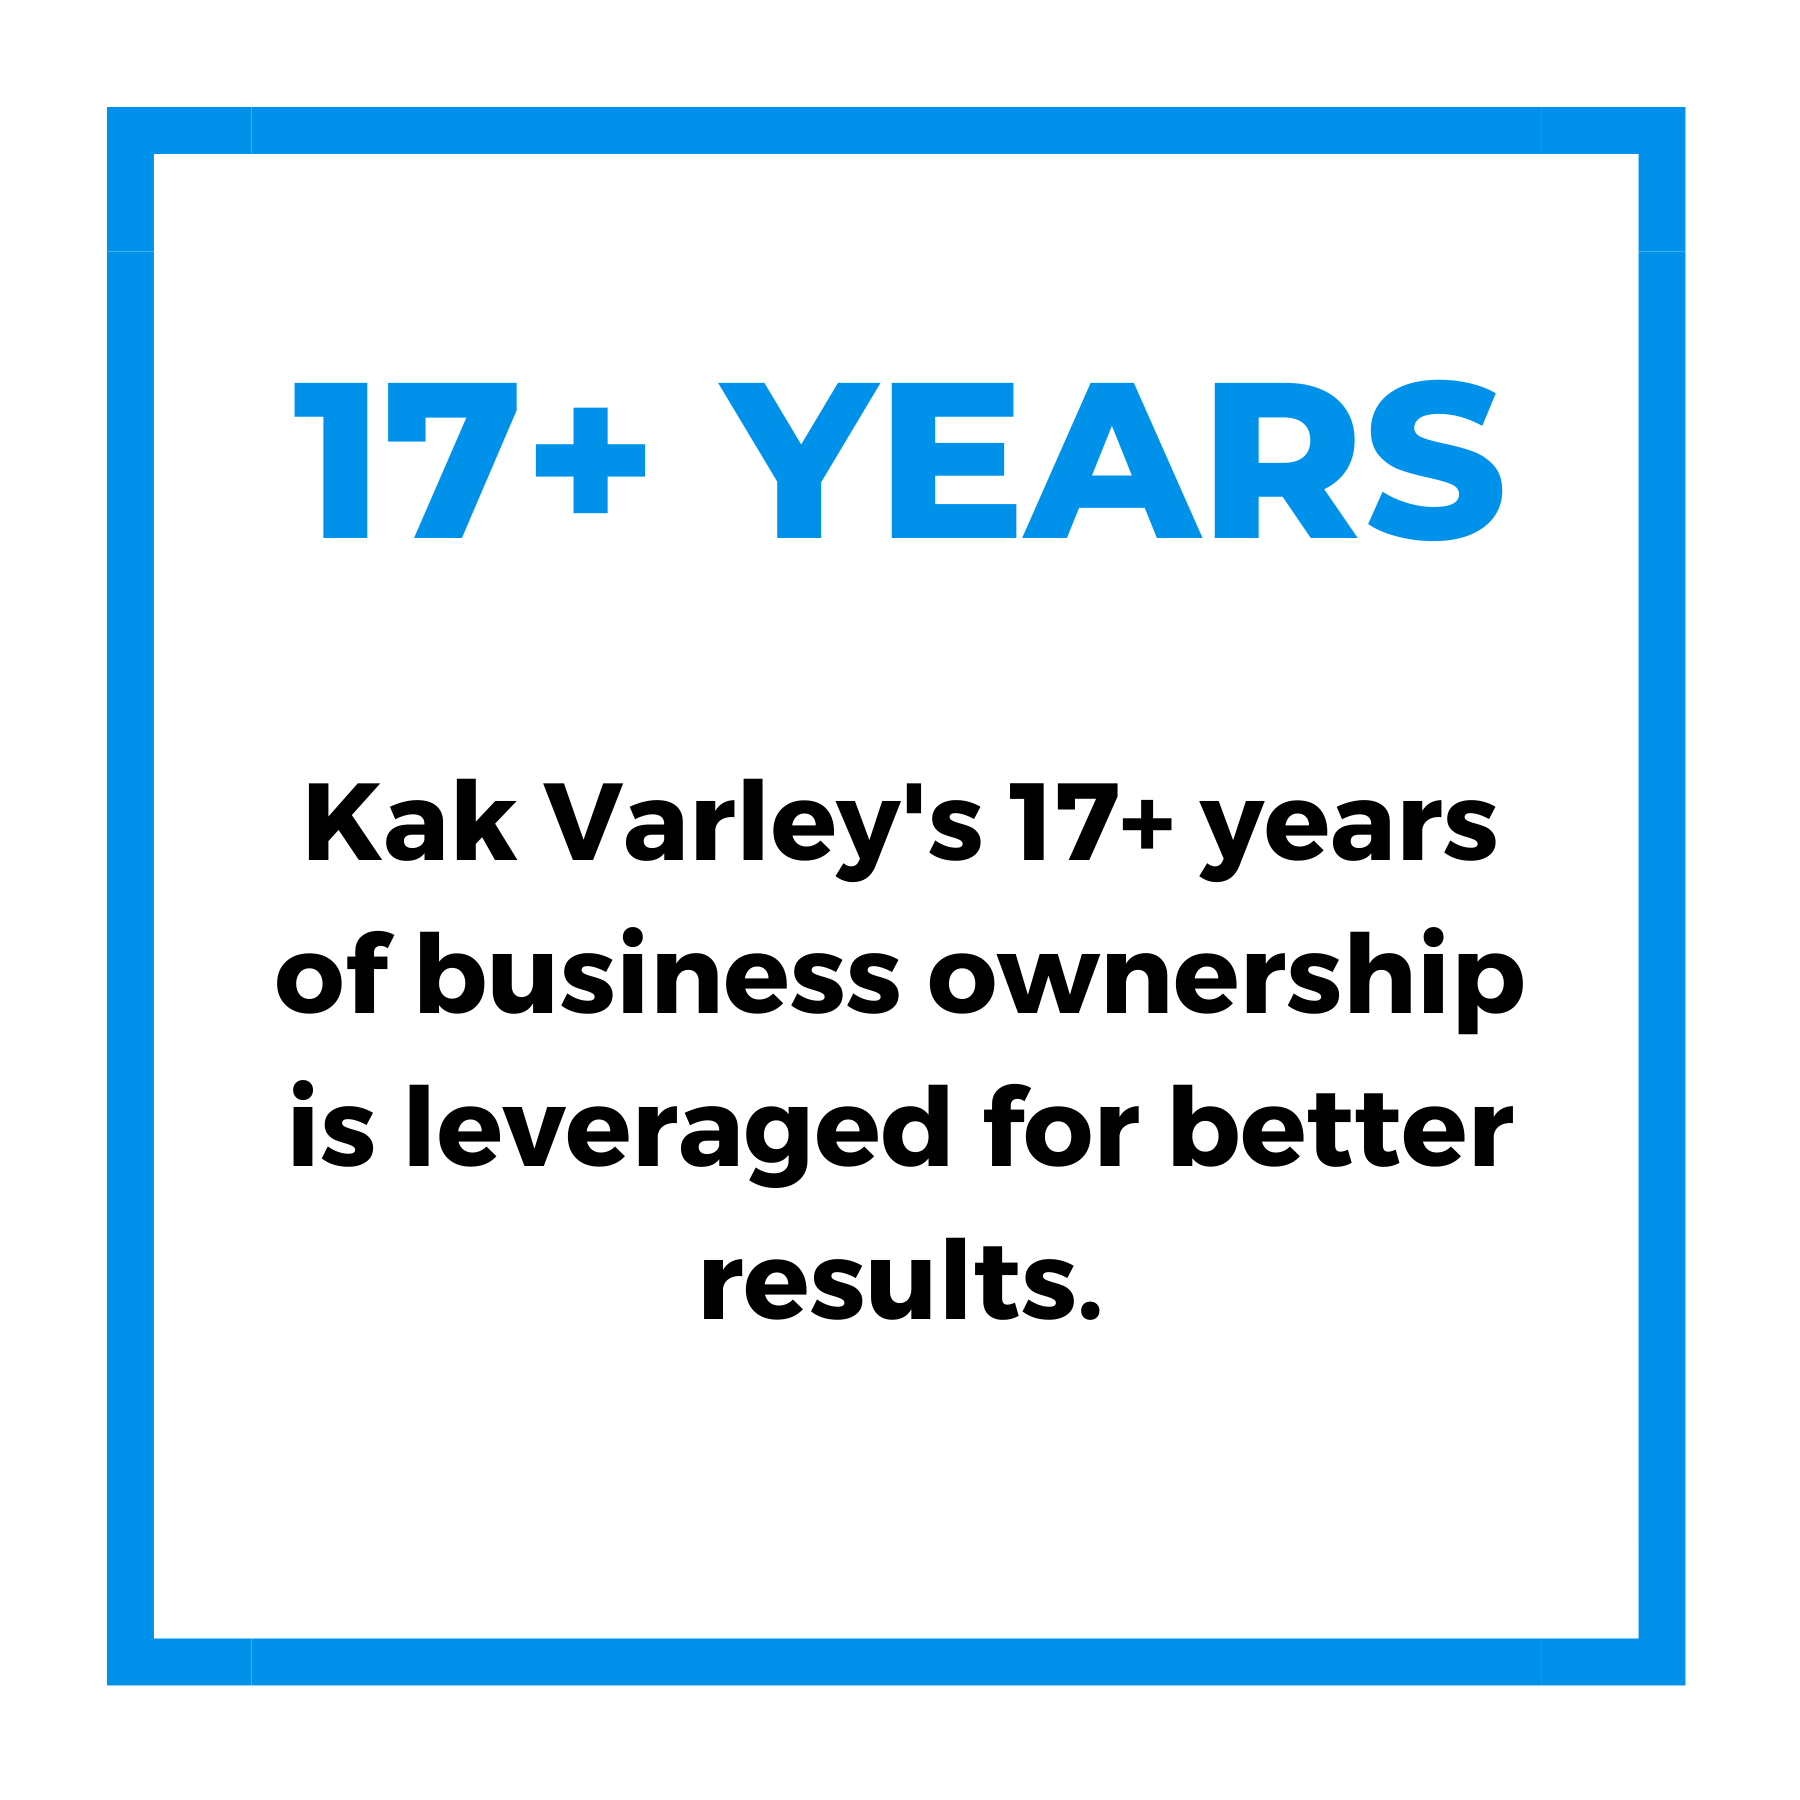 About Kak Varley - Business Ownership Experience